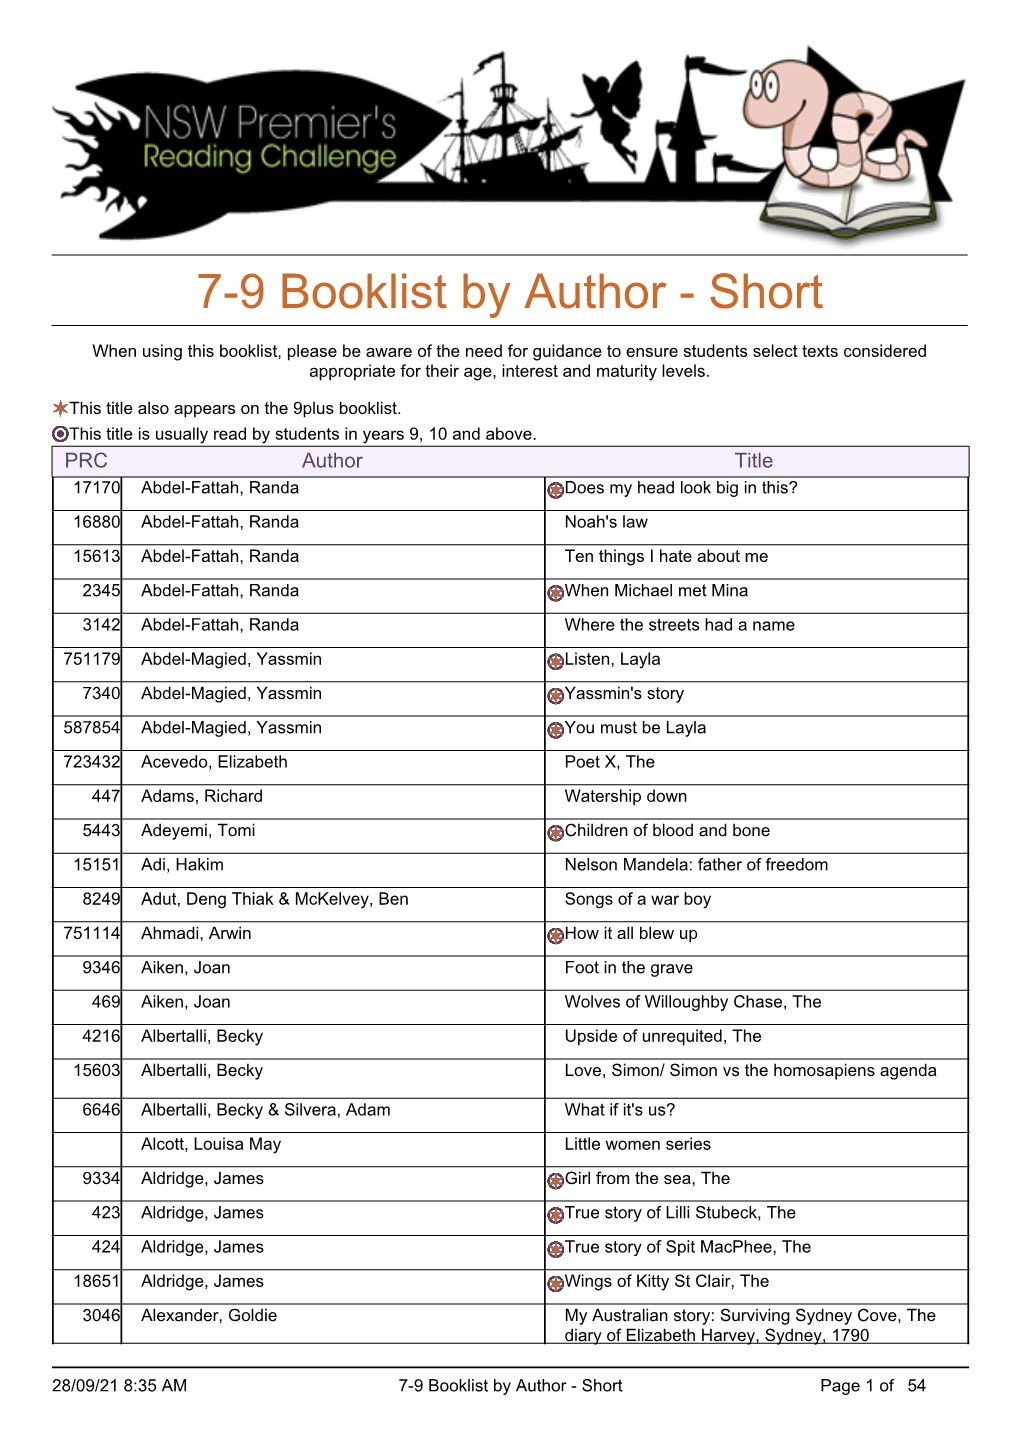 7-9 Booklist by Author - Short